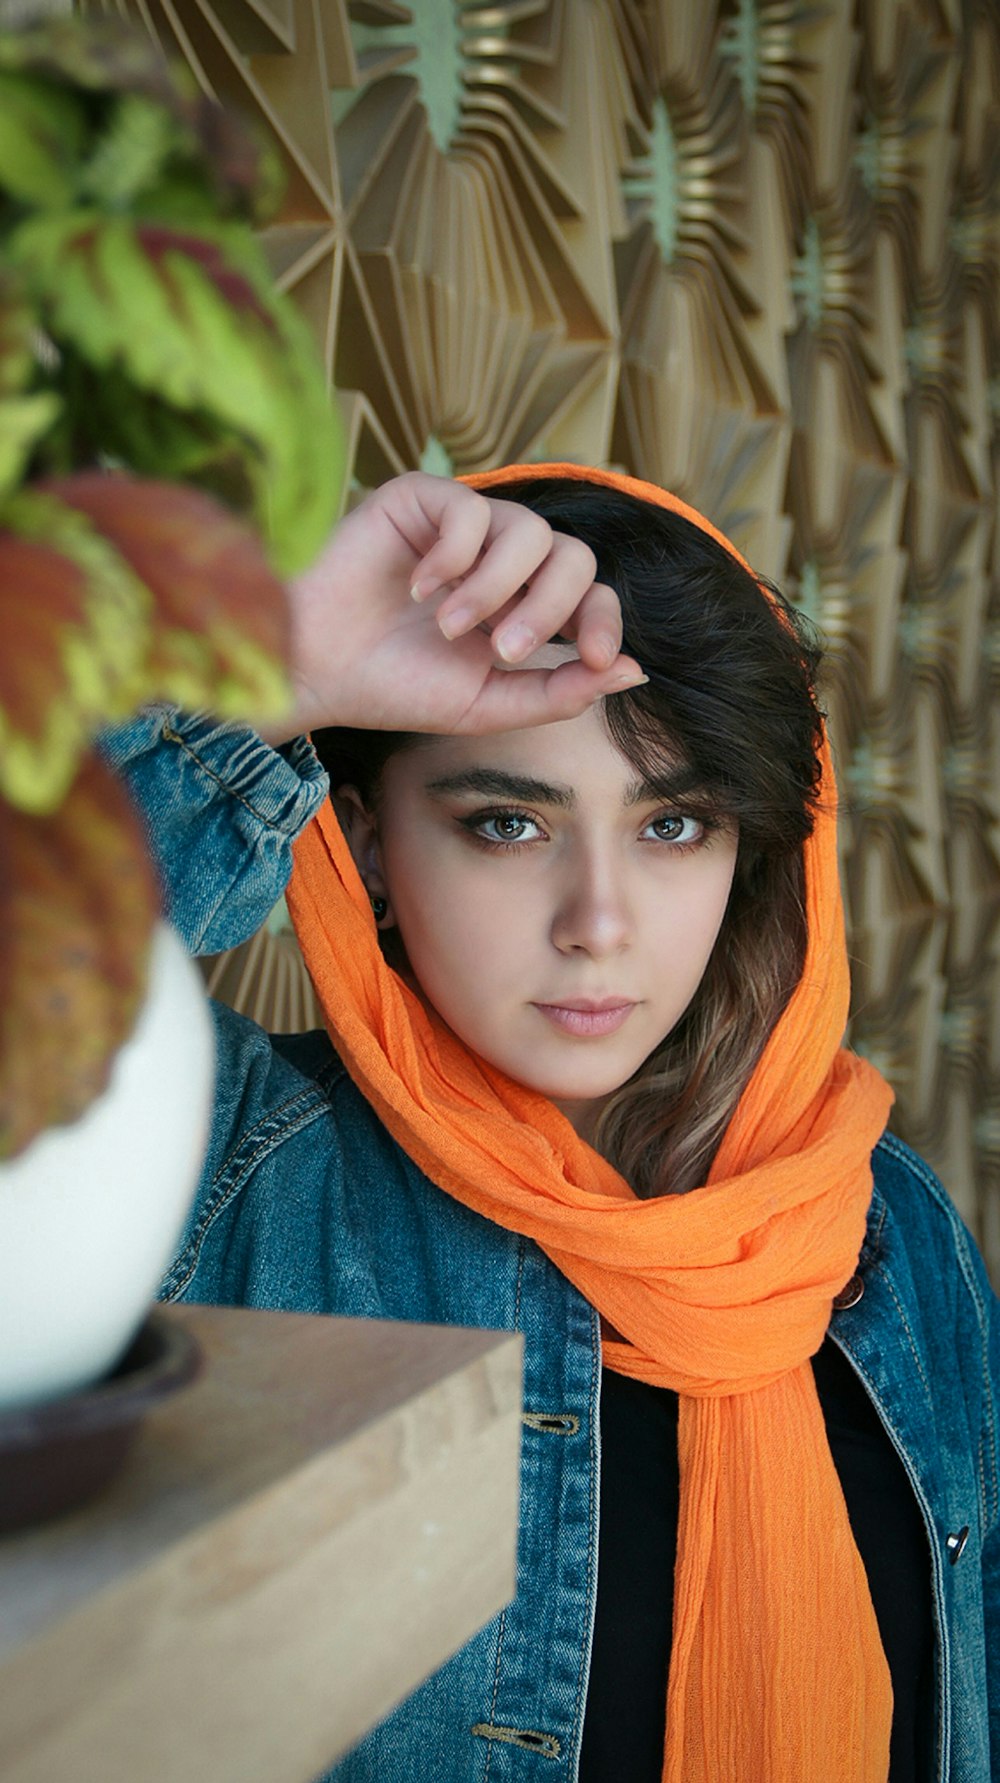 woman wearing blue denim button-up jacket and orange scarf standing and leaning near brown wooden plank